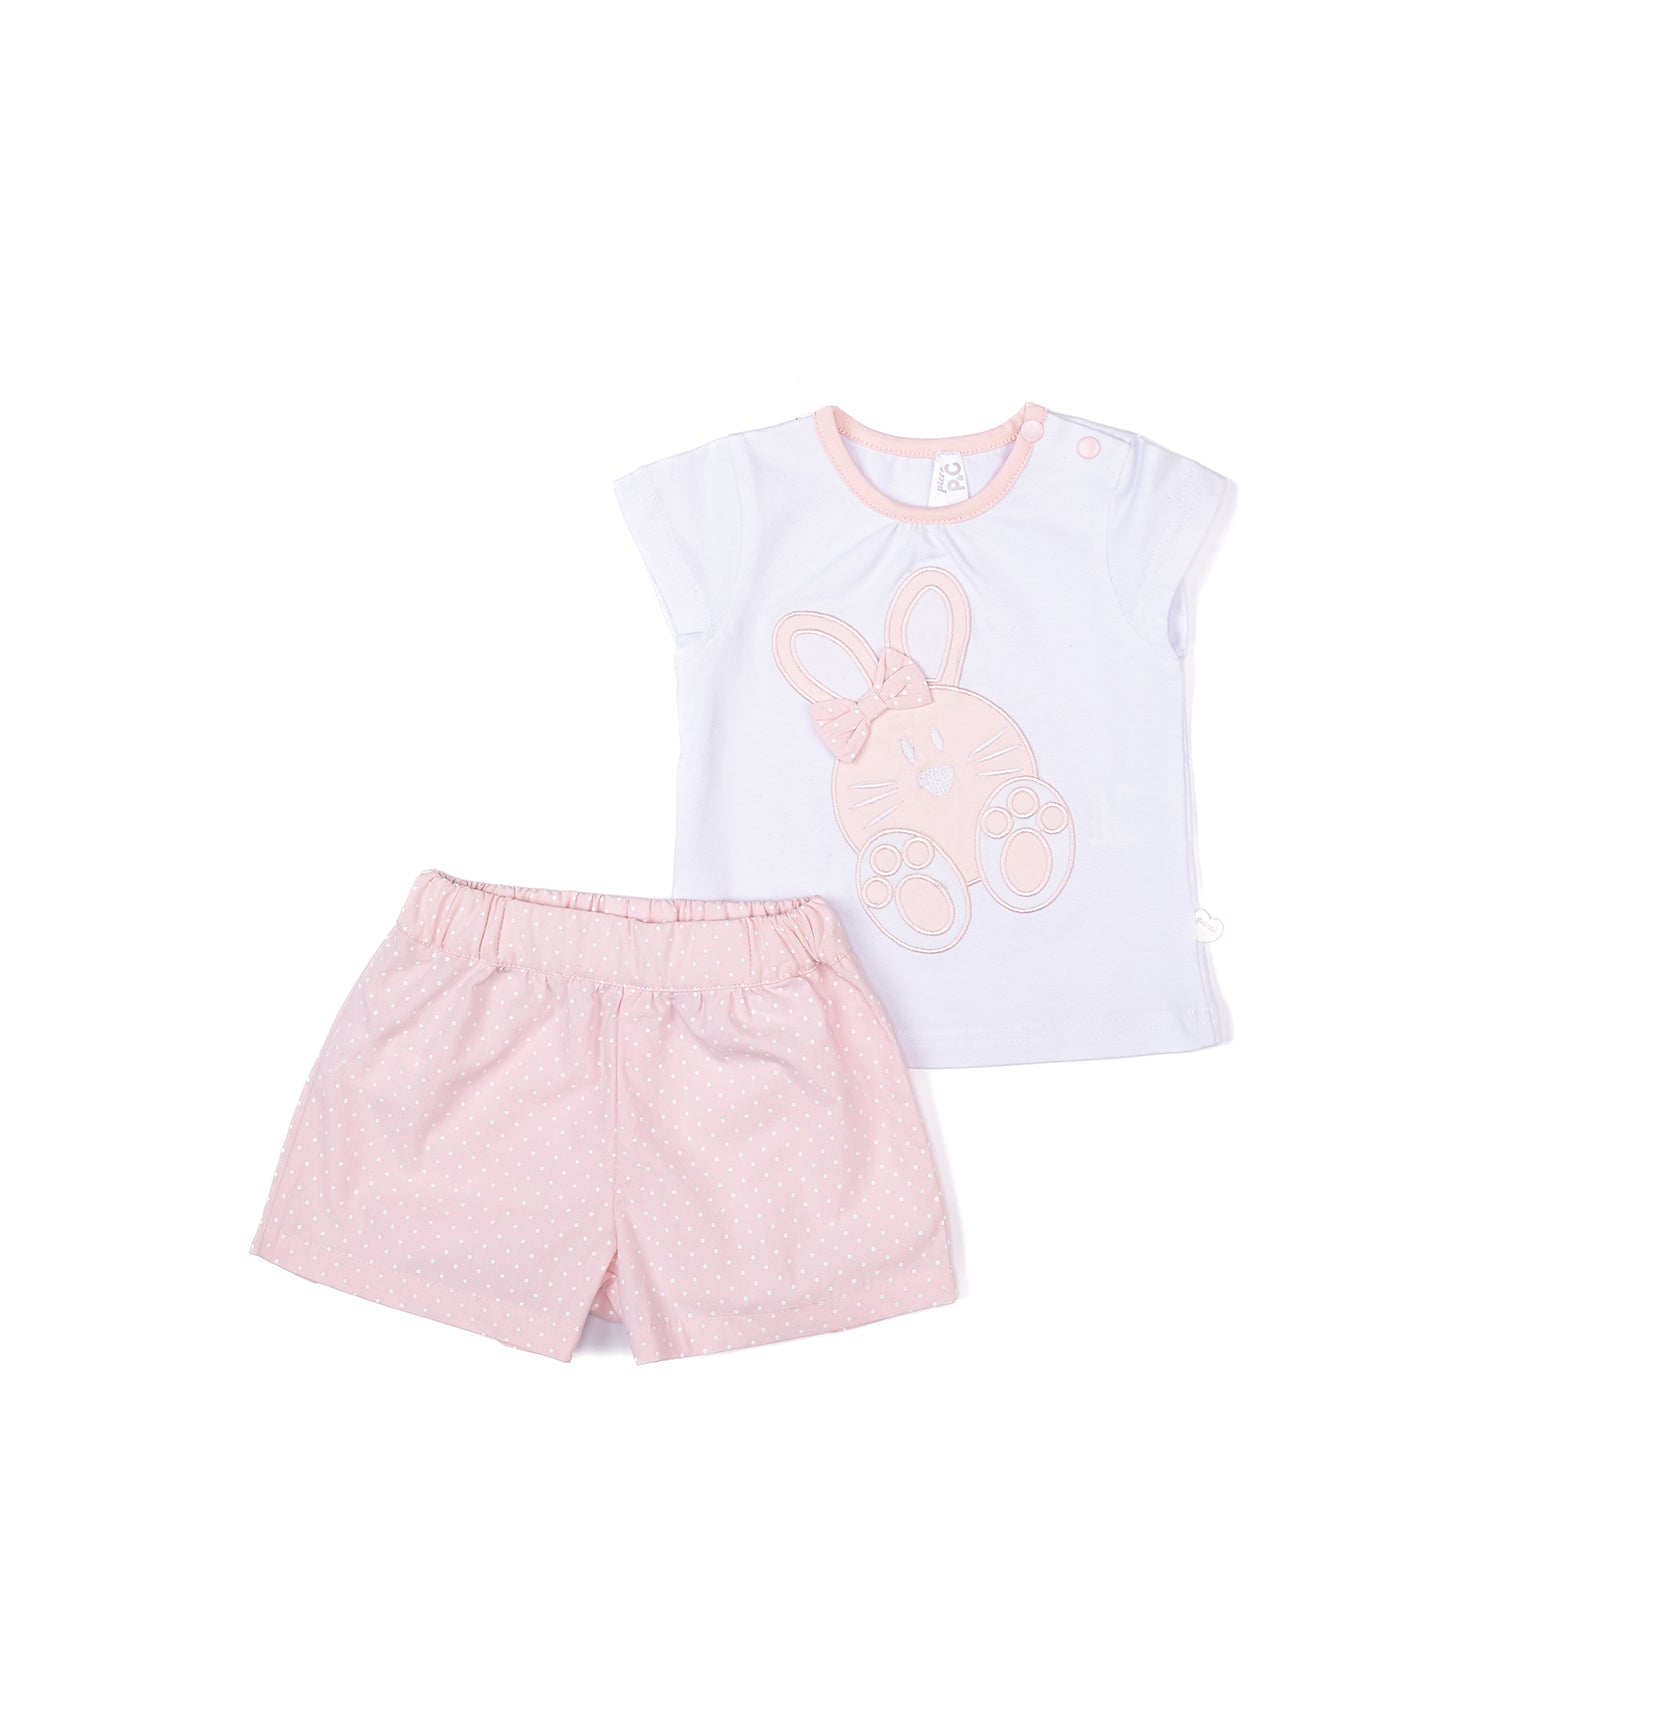 Baby girl cute bunny set by Pompelo